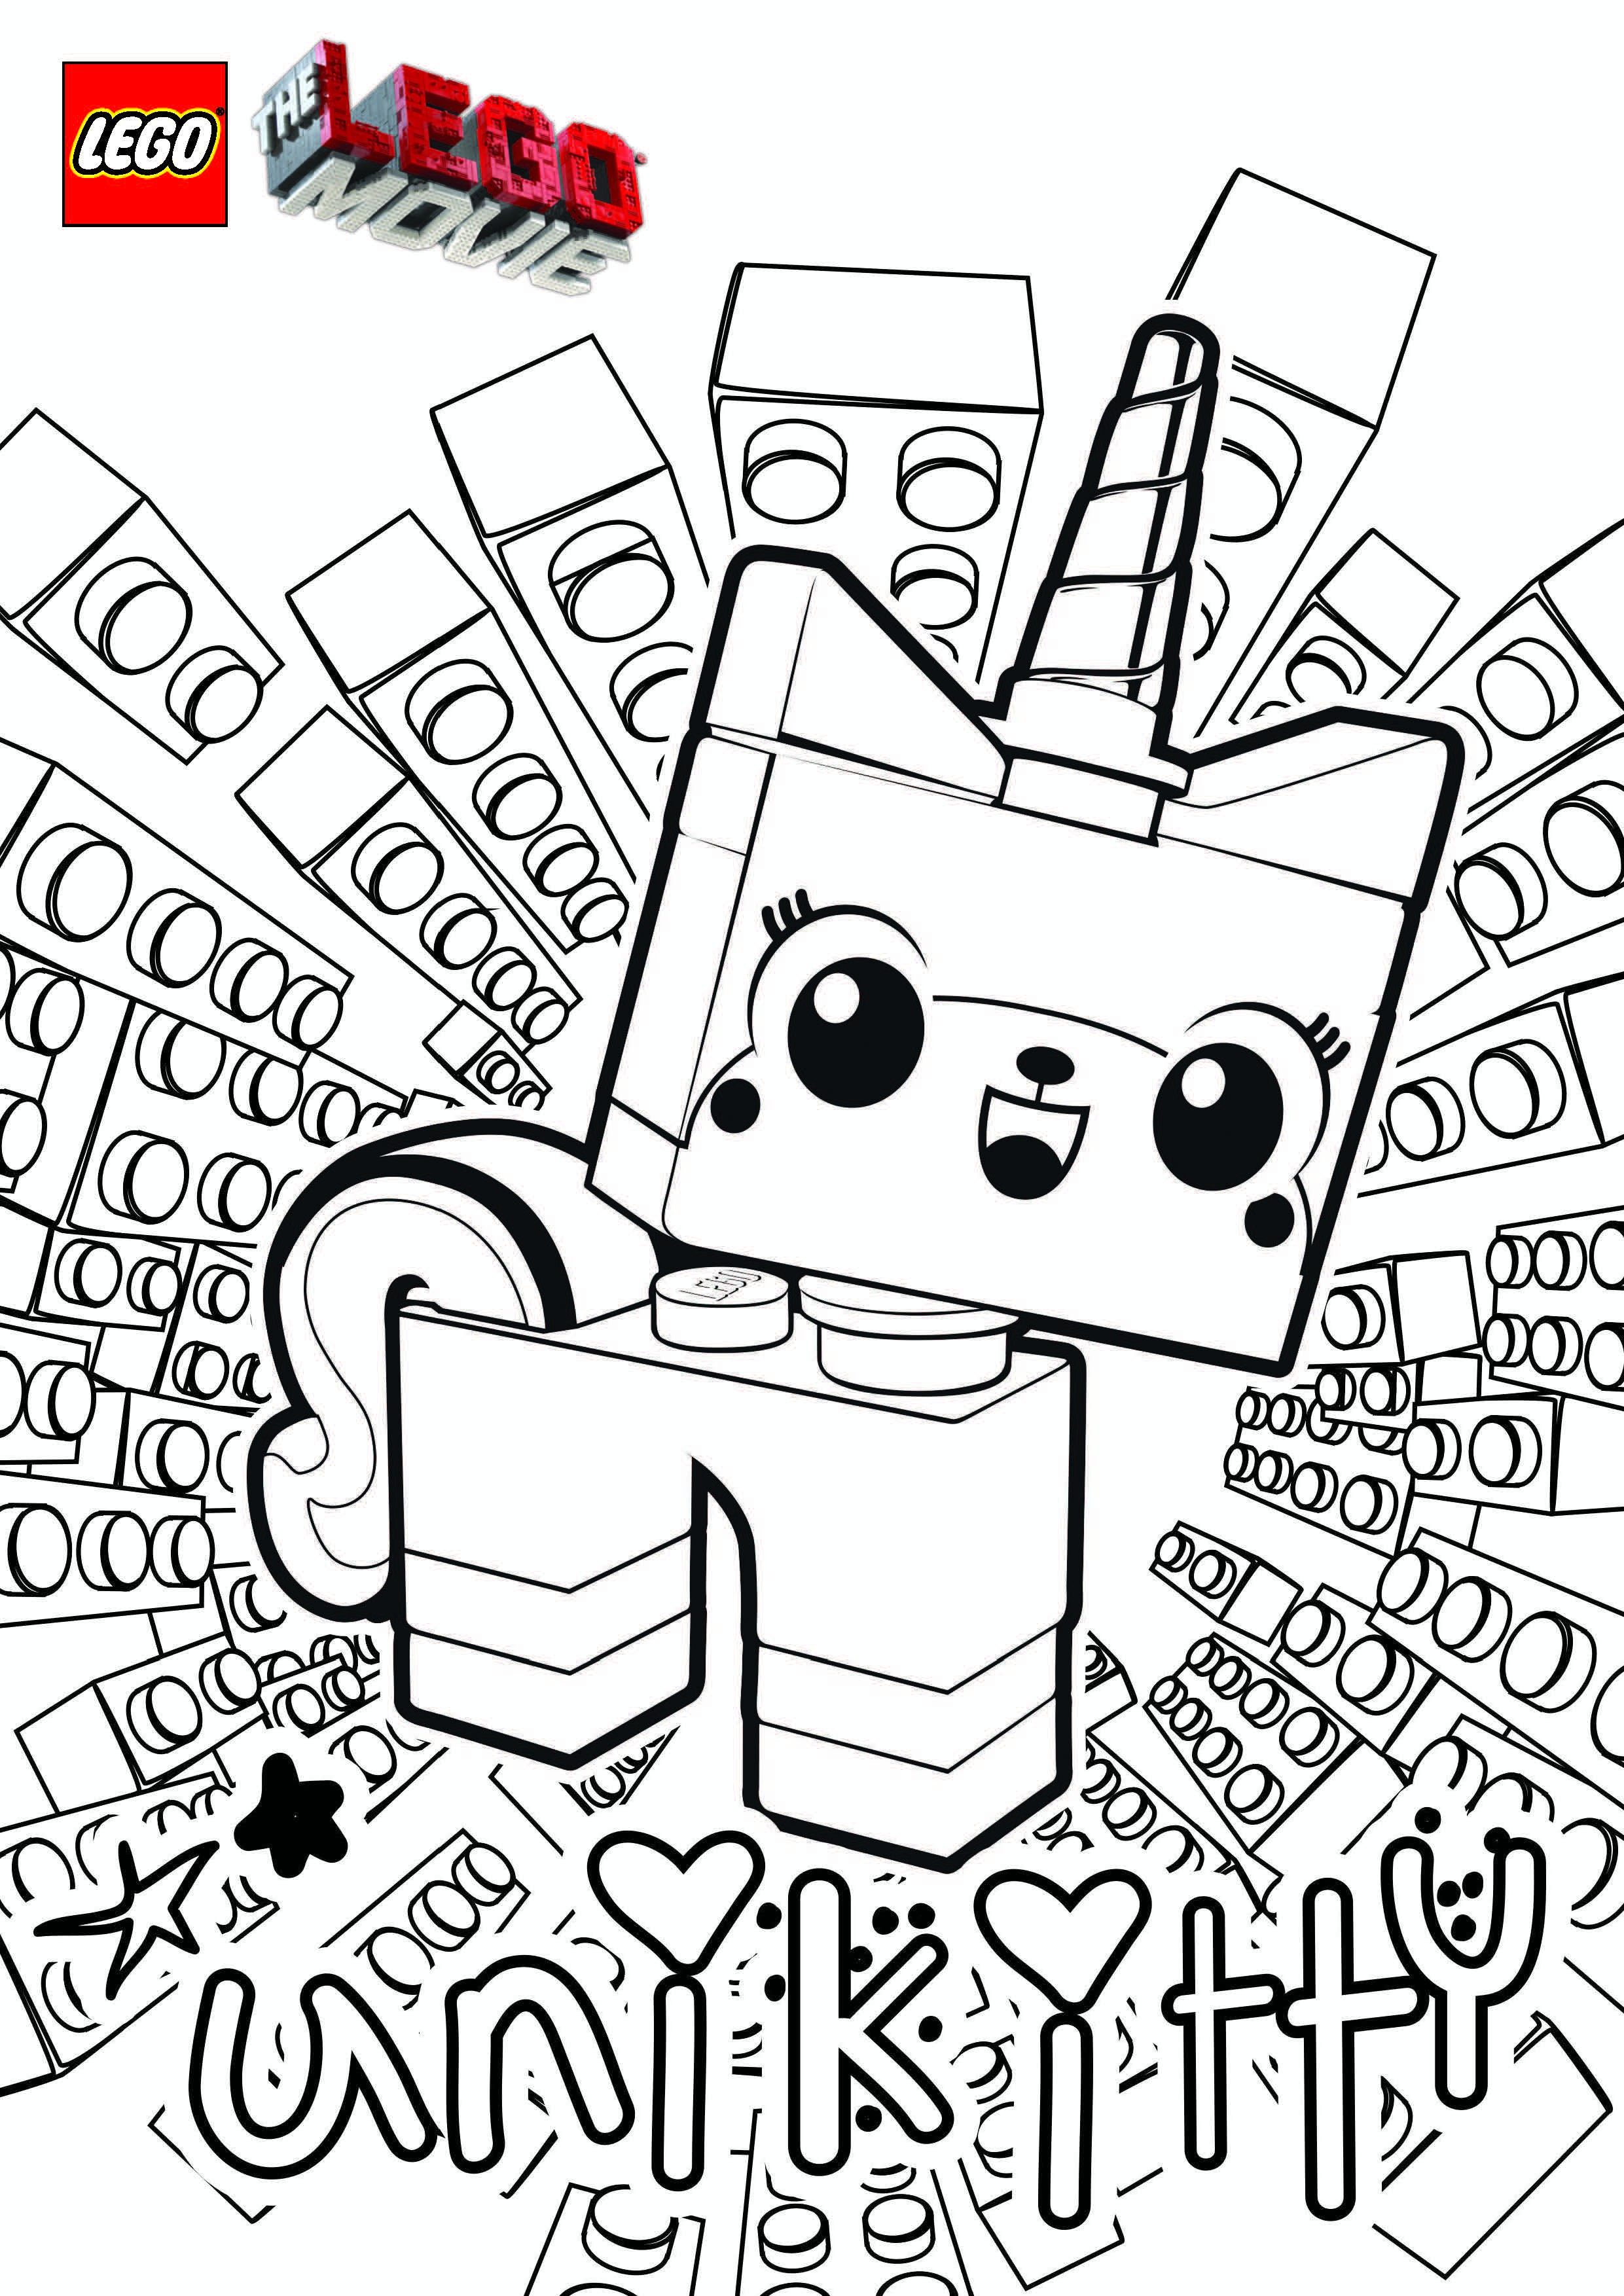 Princess Unikitty Coloring Pages Wallpaper